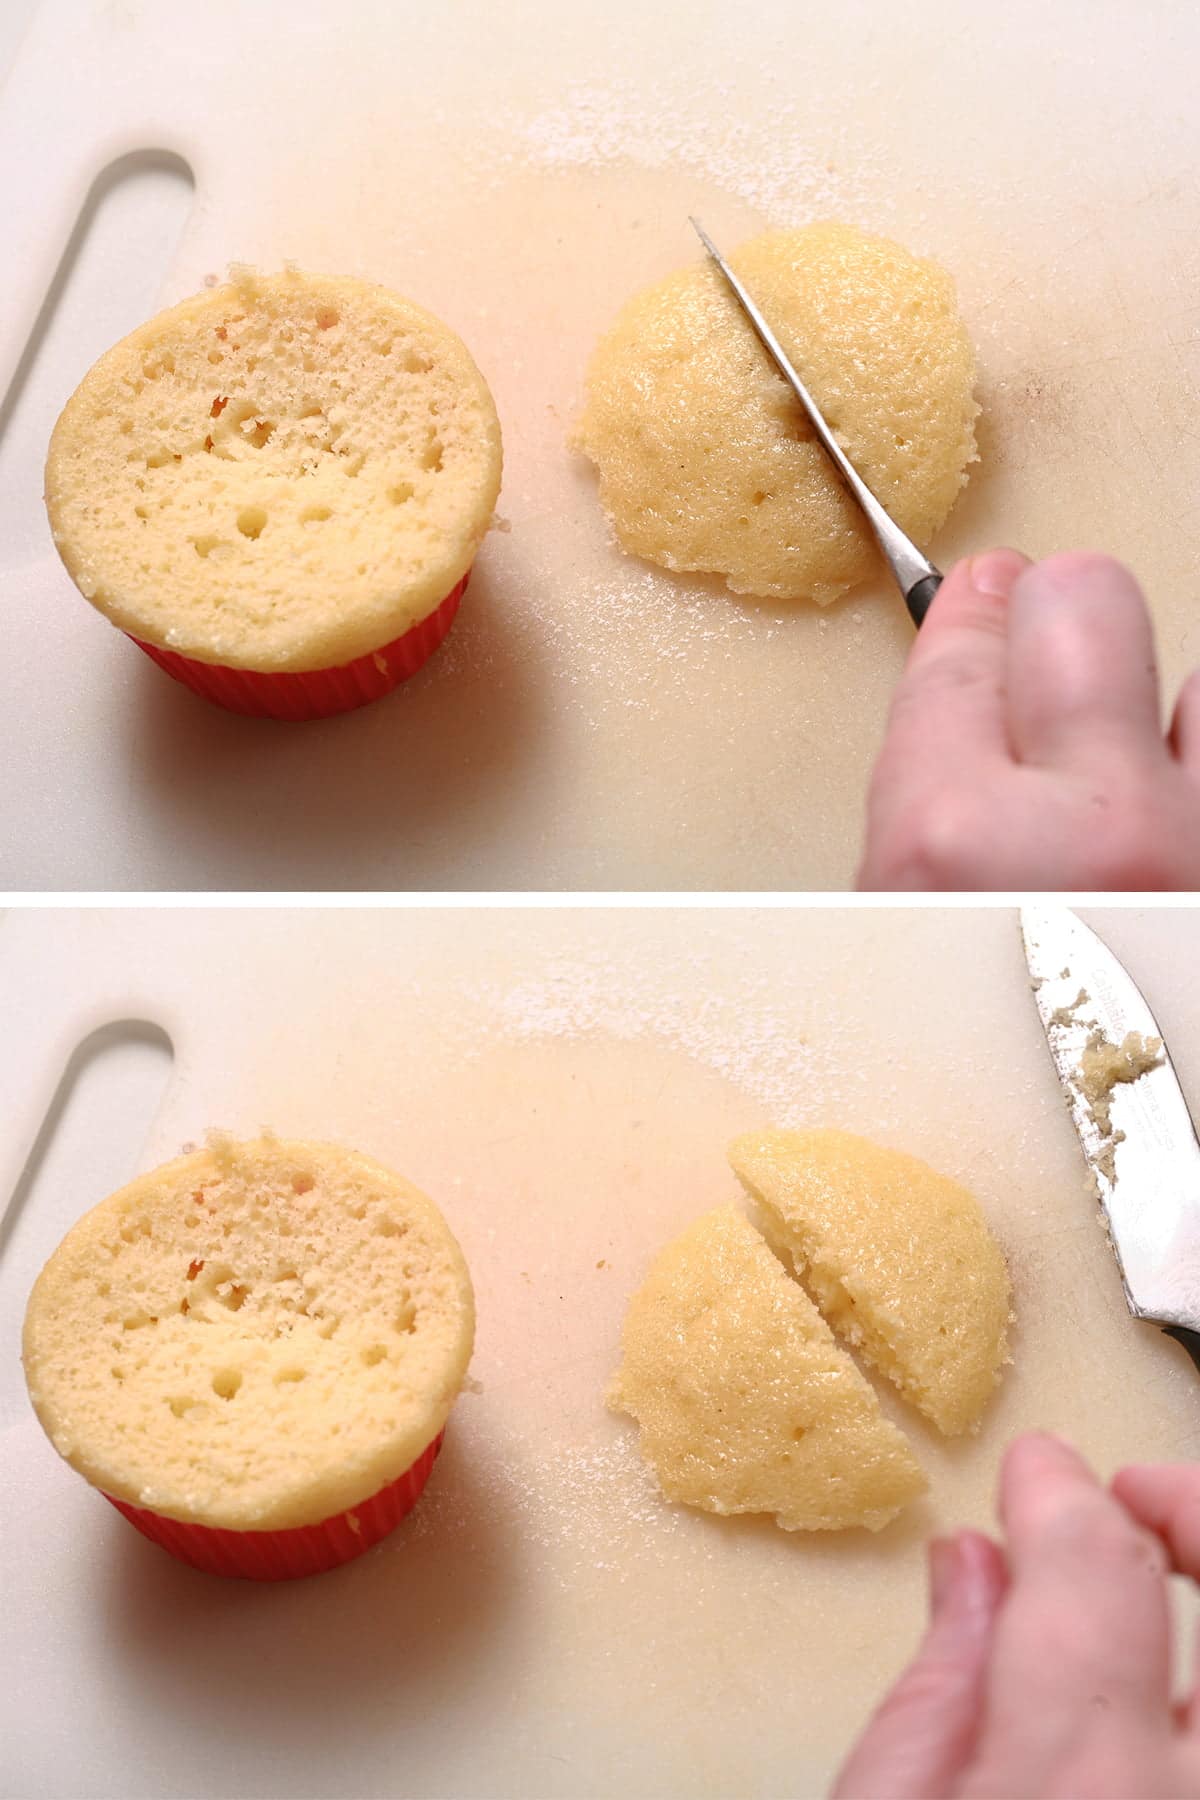 A two part image showing the removed dome of cupcake being cut in half.